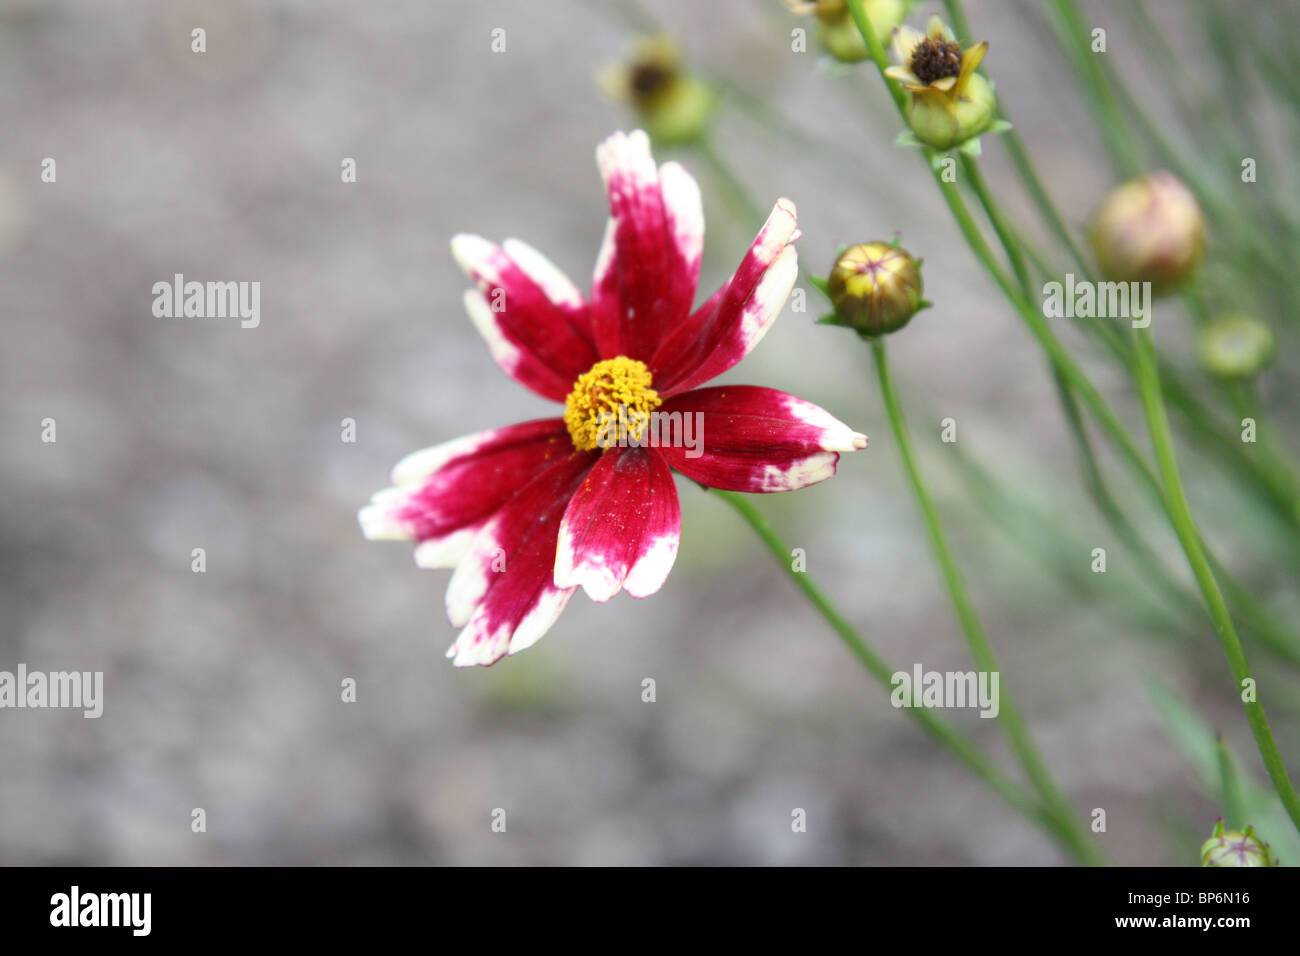 Ruby Red Petals Stock Photos Ruby Red Petals Stock Images Alamy